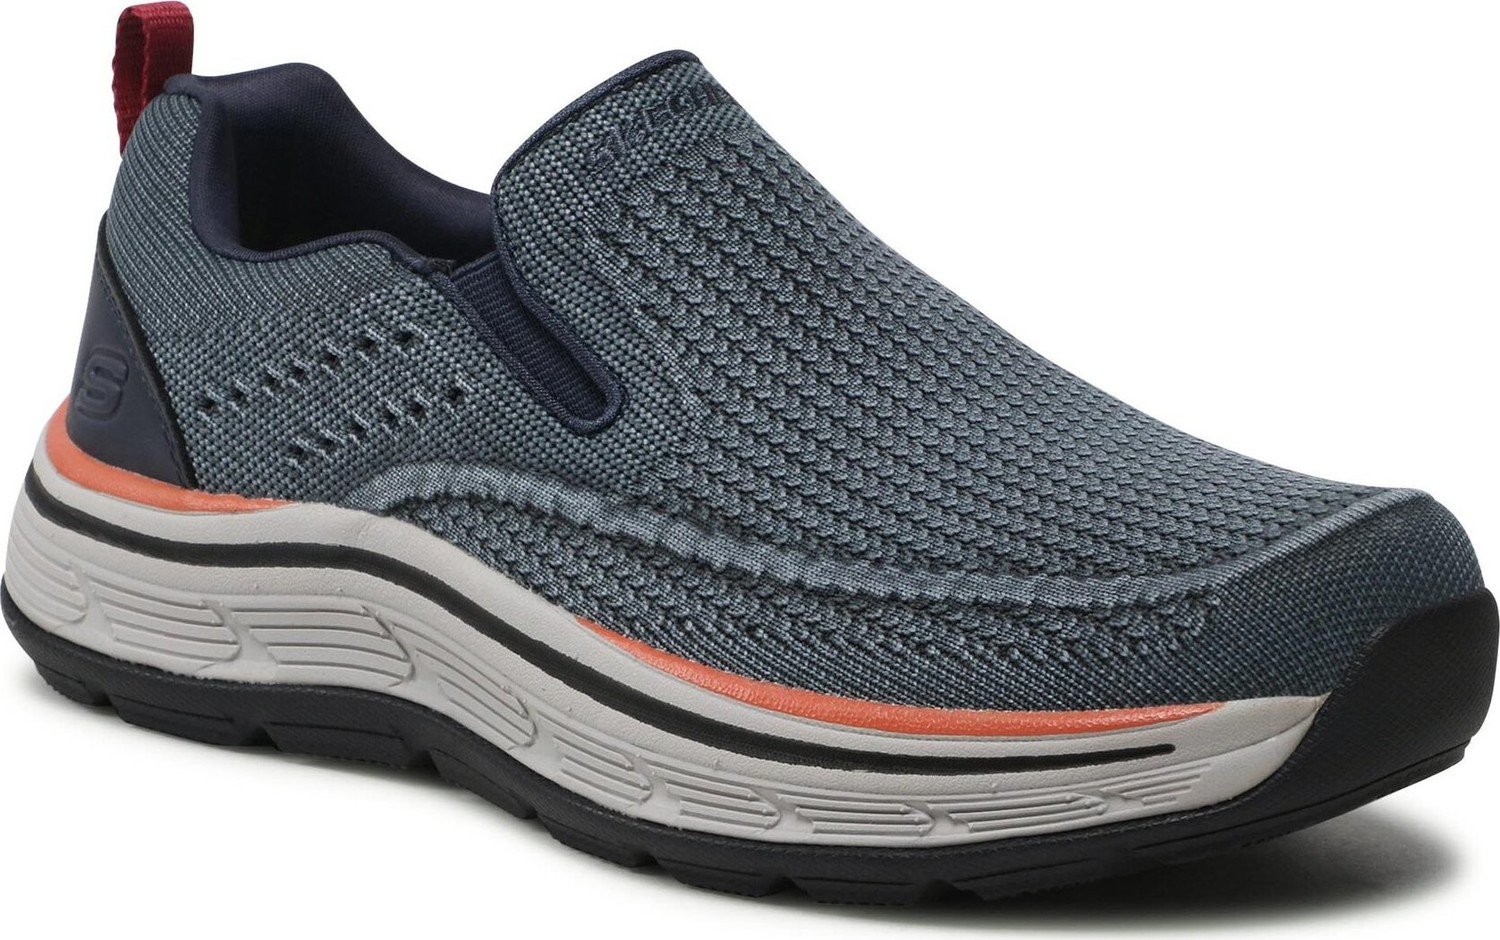 Polobotky Skechers Remaxed Edlow 204375 NVY